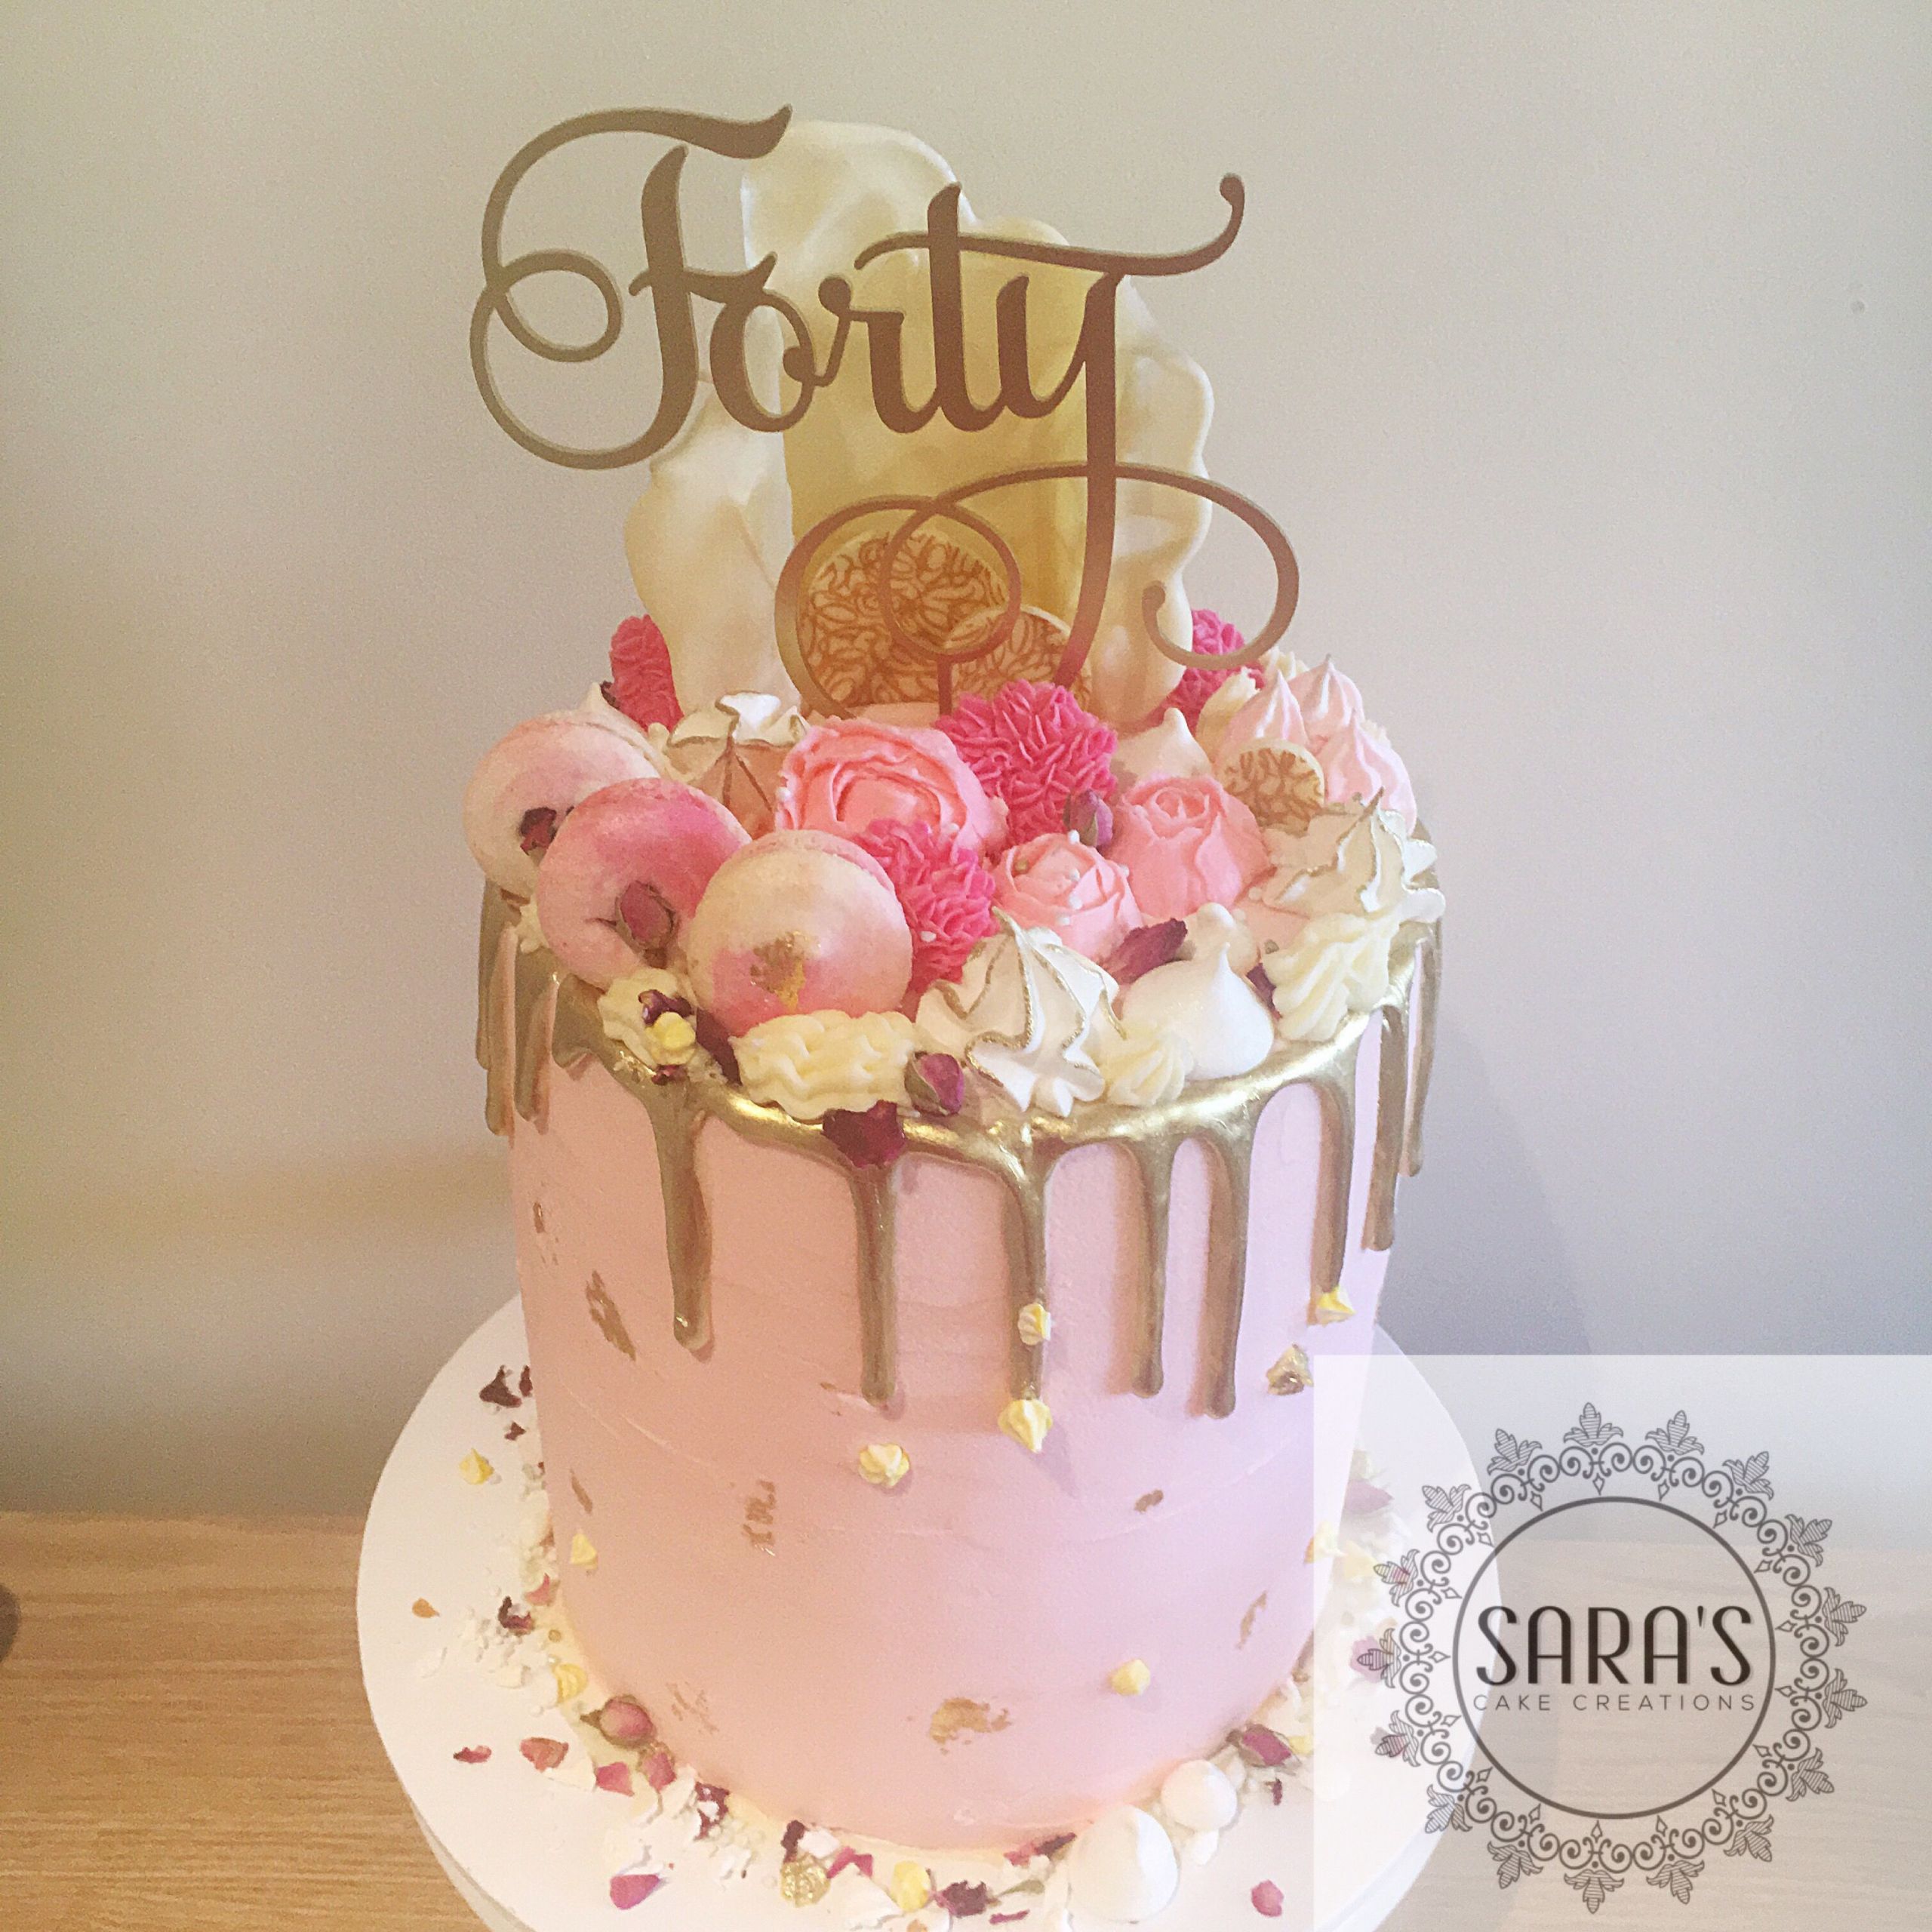 40th Birthday Cake Ideas
 40th Birthday cake in rose gold and blush pink With 24k